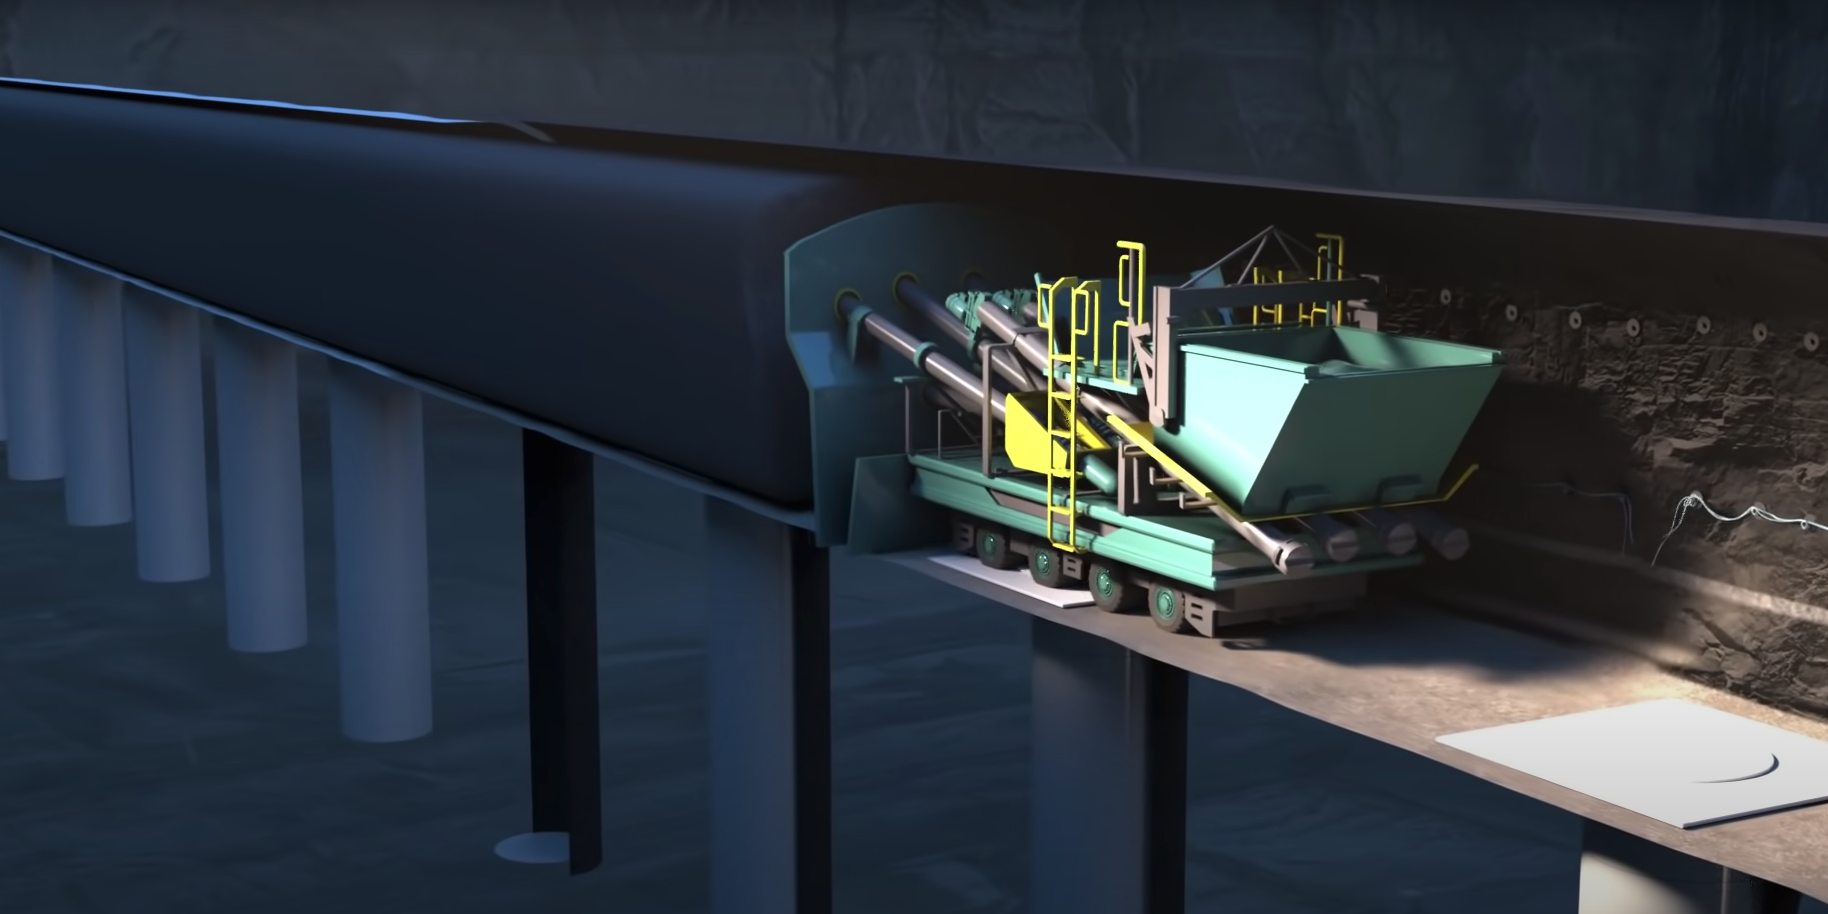 A still from an animation shows the machine filling up the tunnel with bentonite.